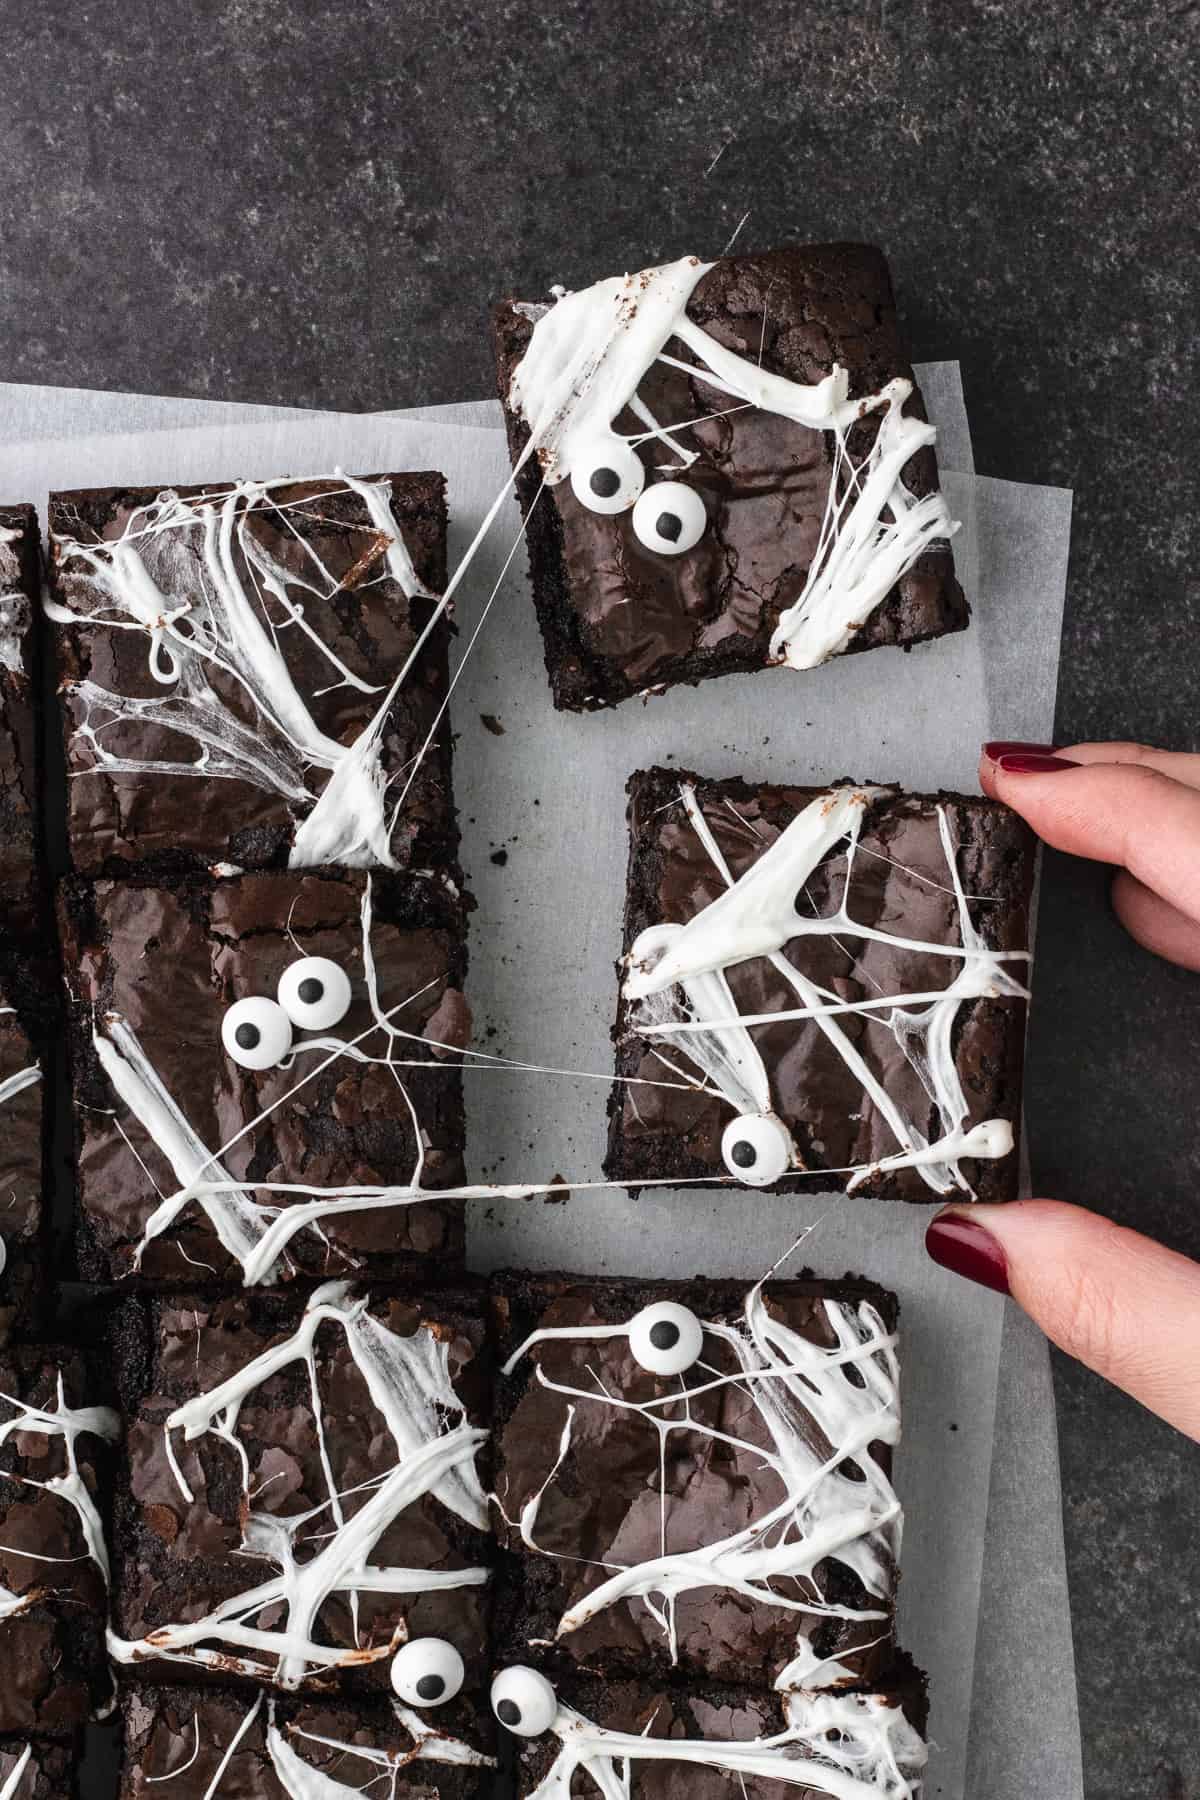 Hand reaches for spider web olive oil brownies